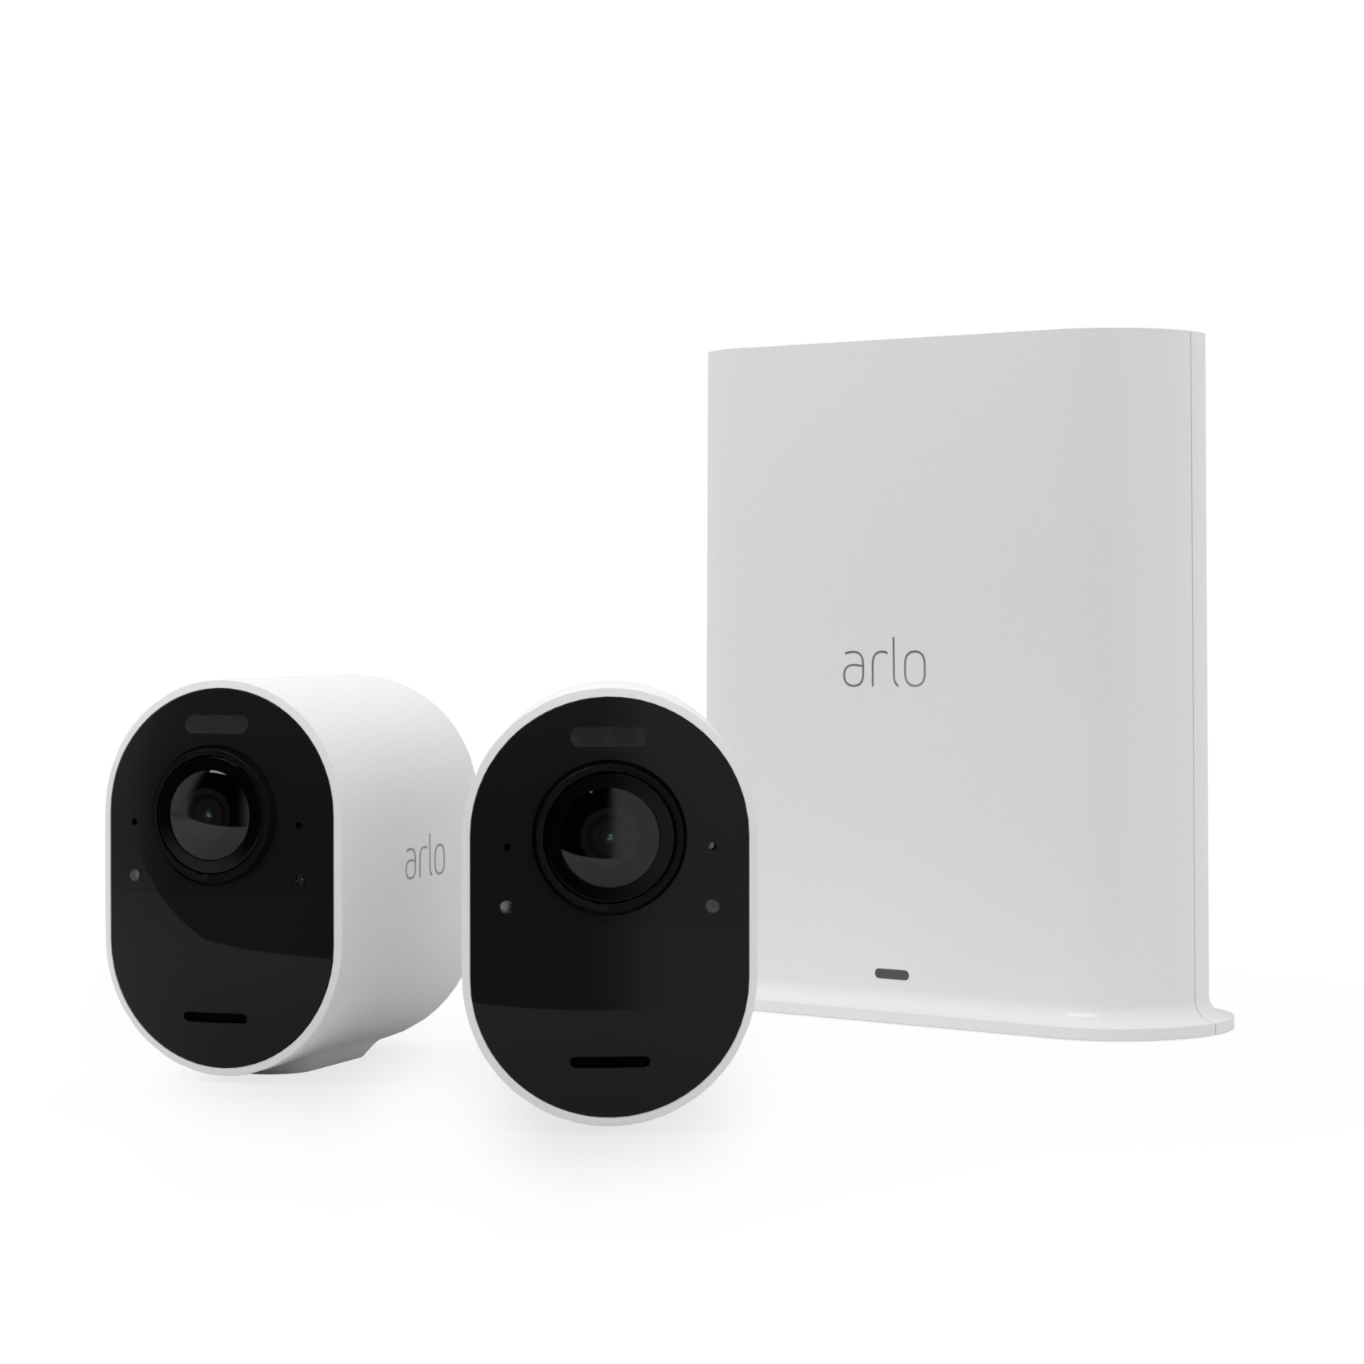 Arlo Ultra Wireless Smart Security System with Two 4K HDR Cameras (VMS5240-100EUS) - Refurbished Pristine